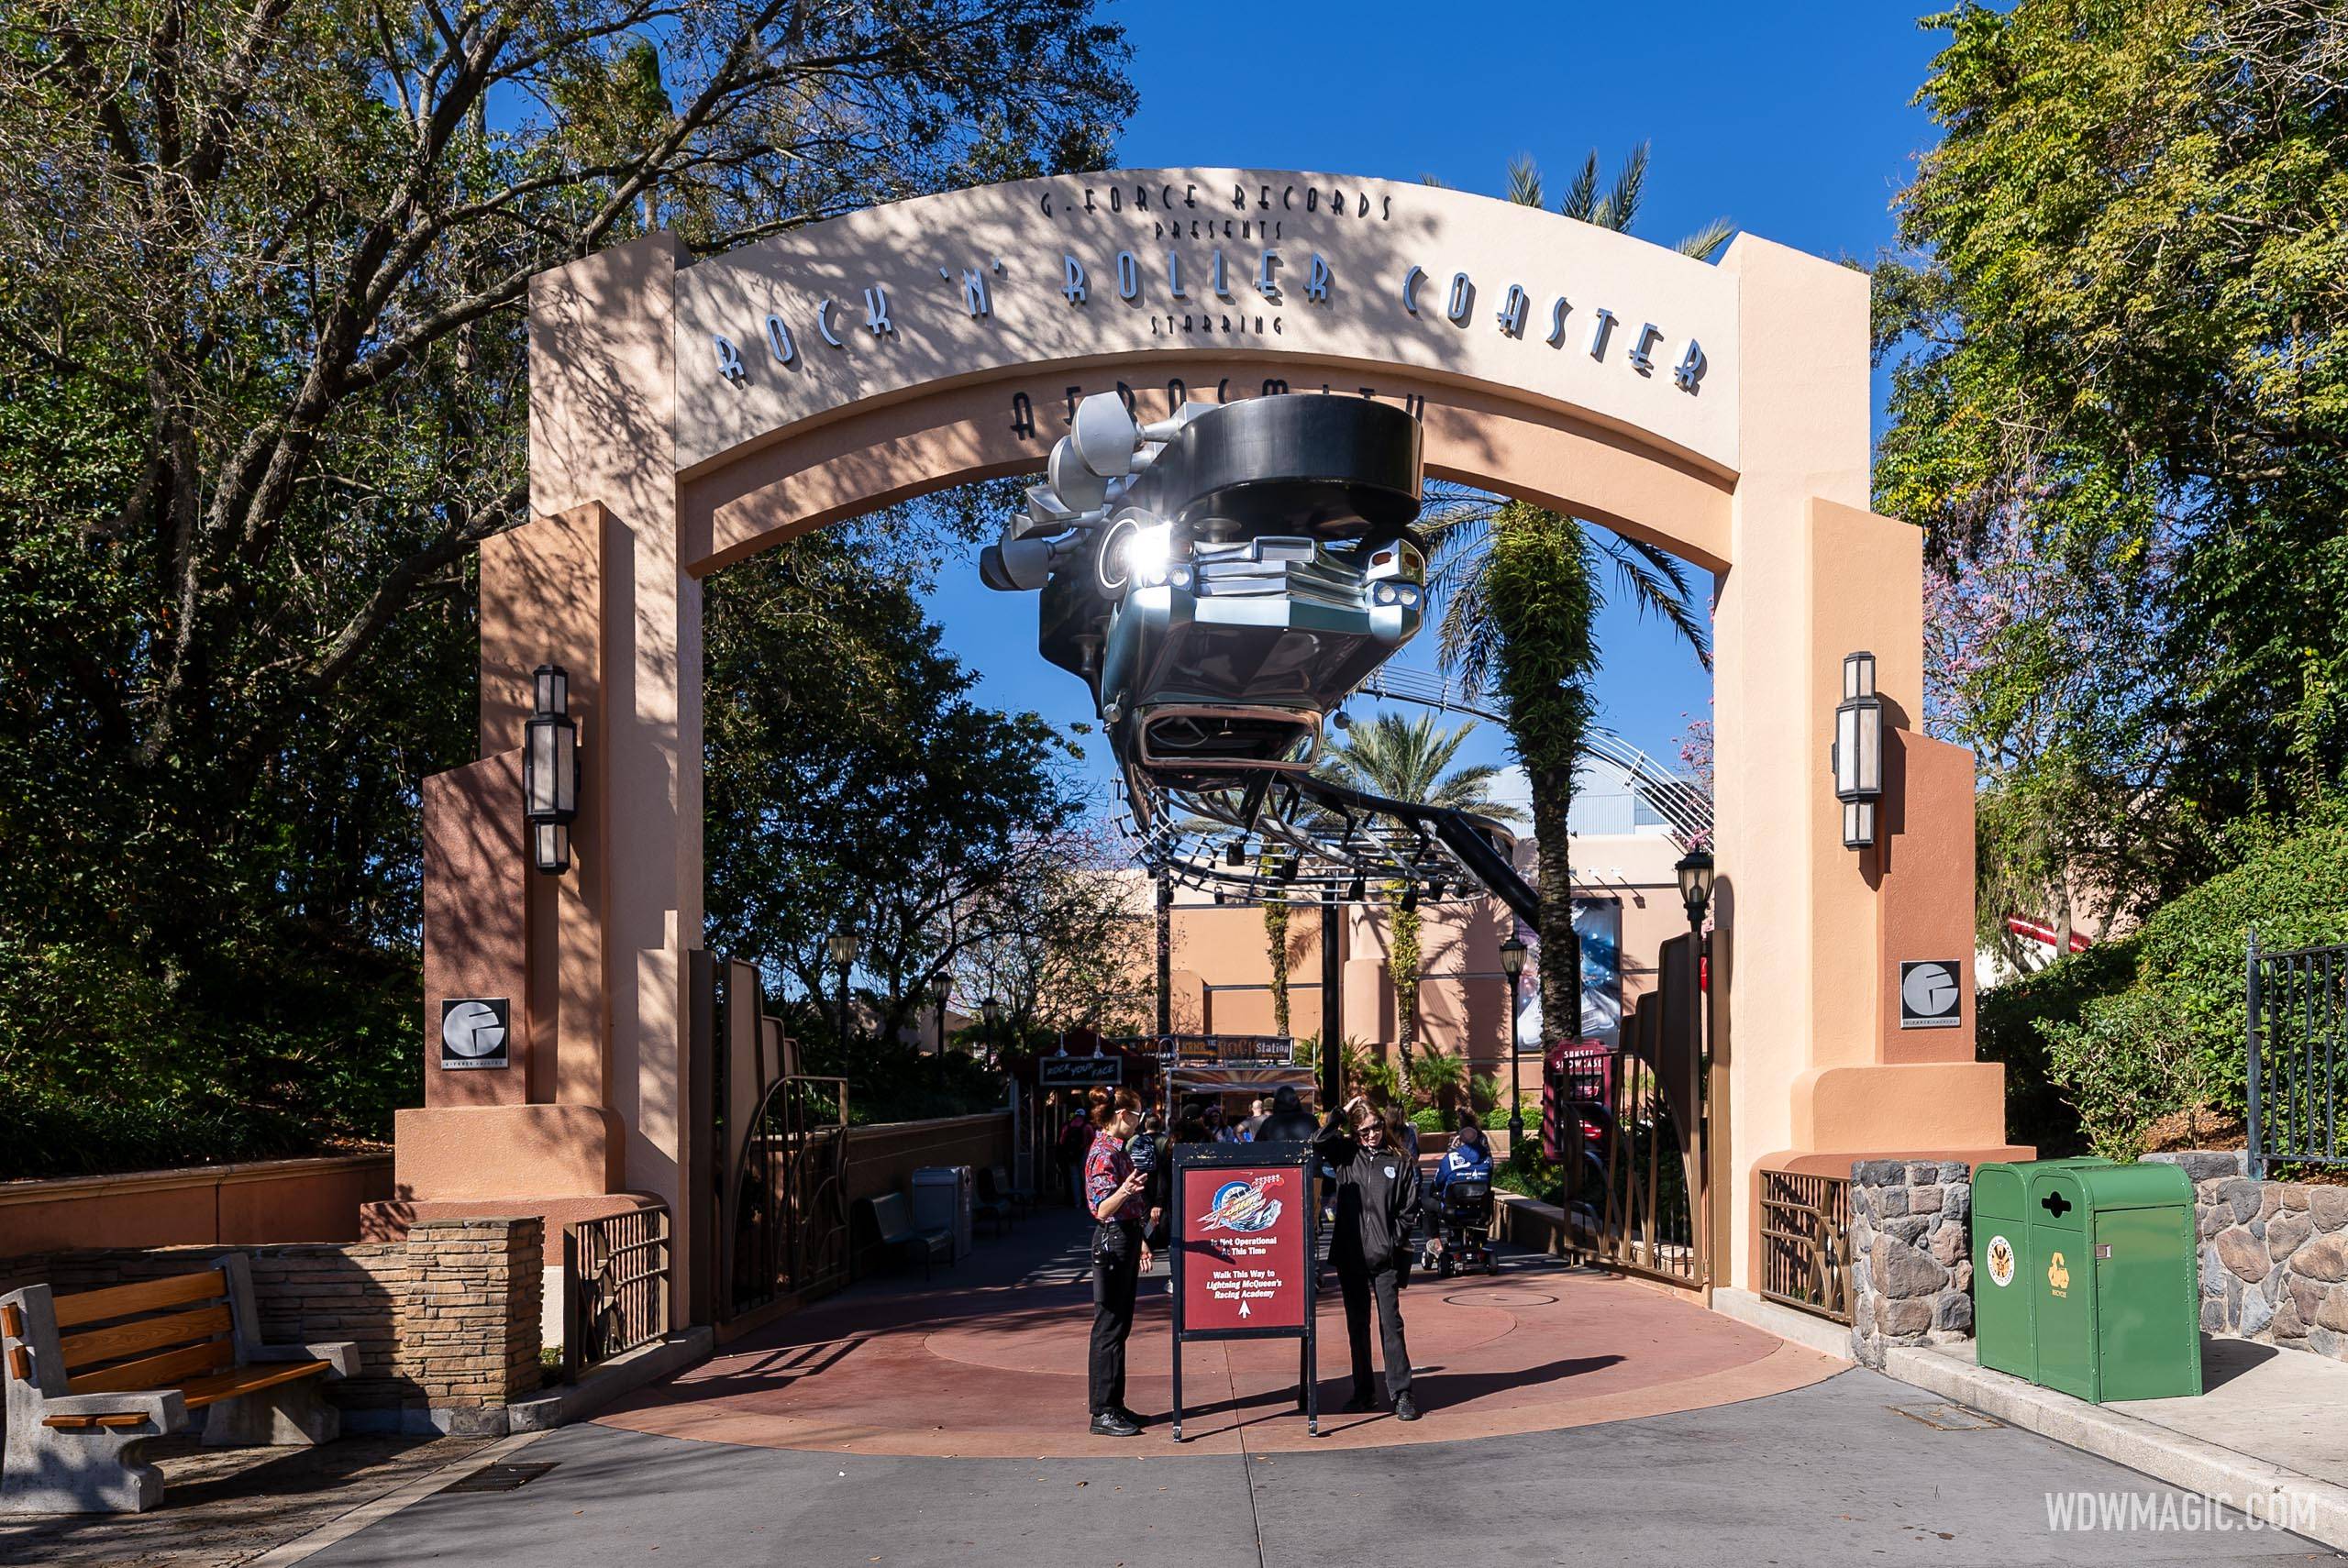 Rock 'n' Roller Coaster will close for renovations on January 6, 2024